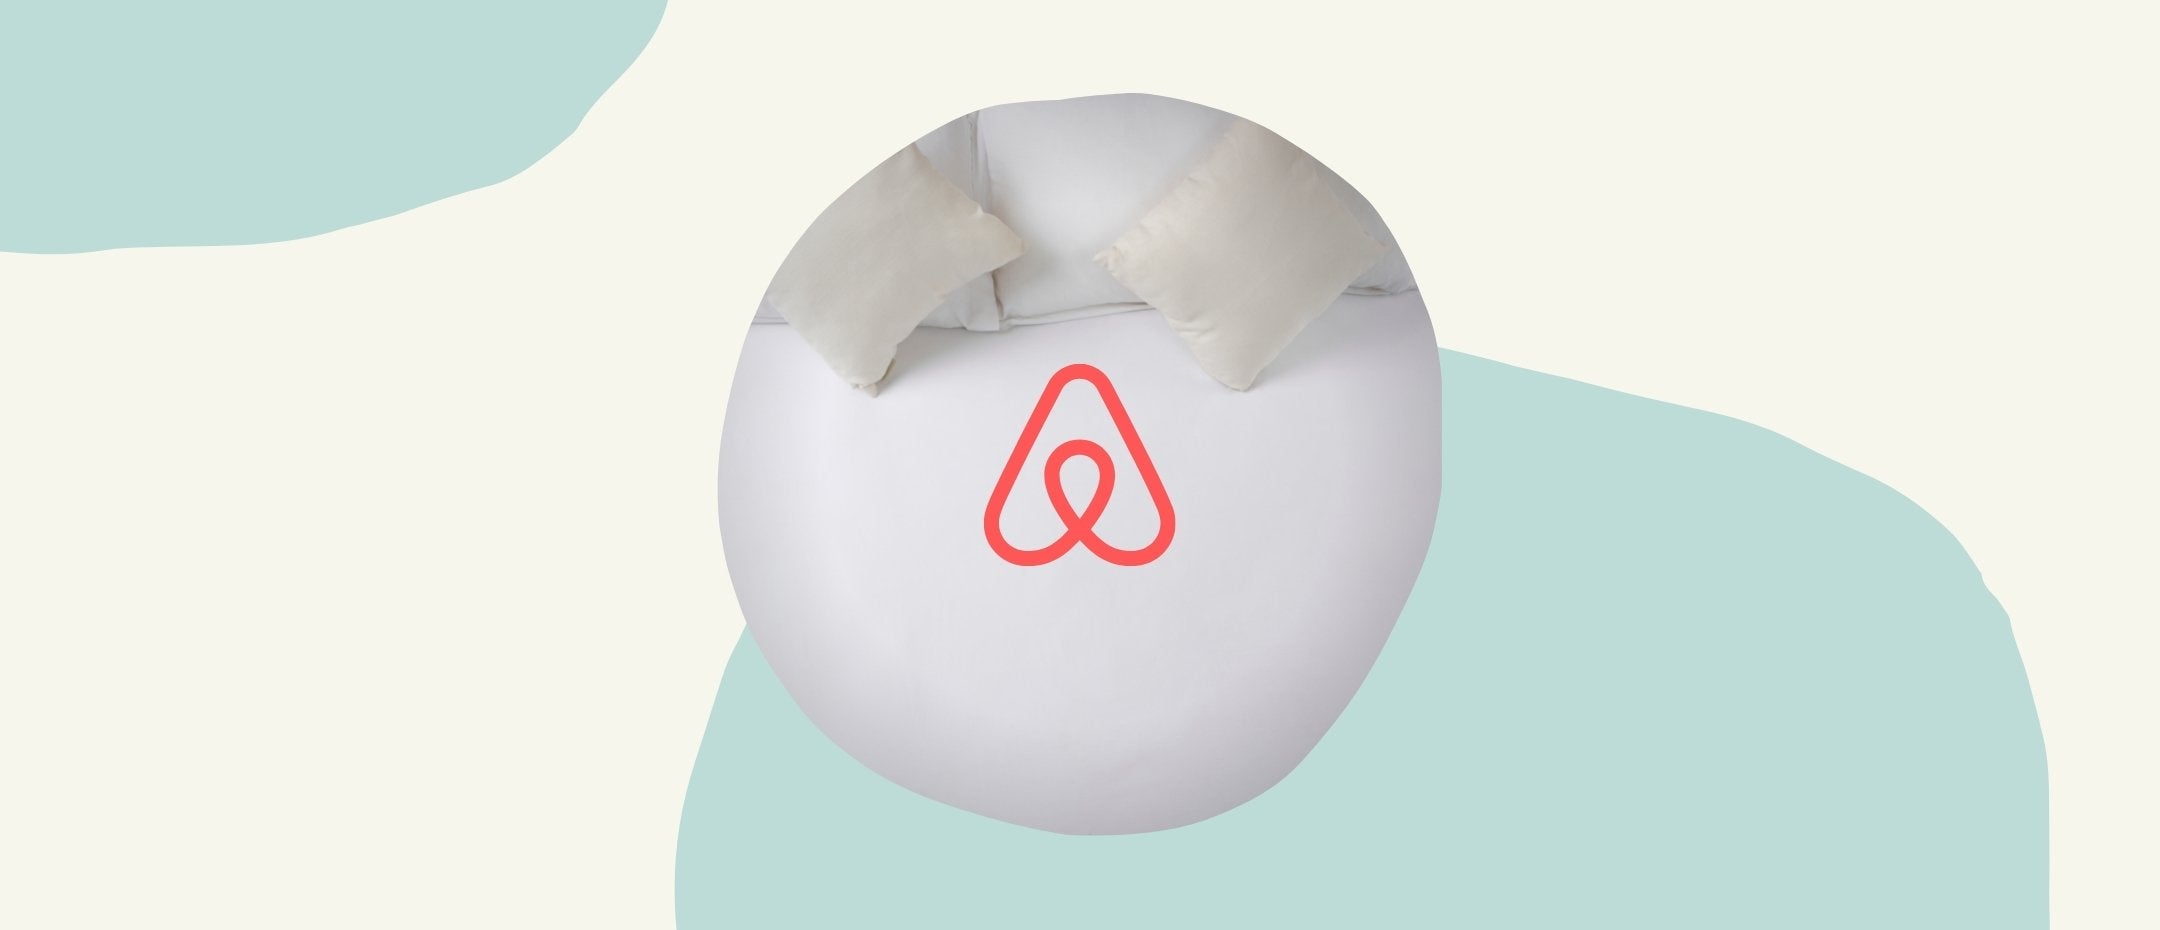 The Airbnb logo above a mattress including pillows